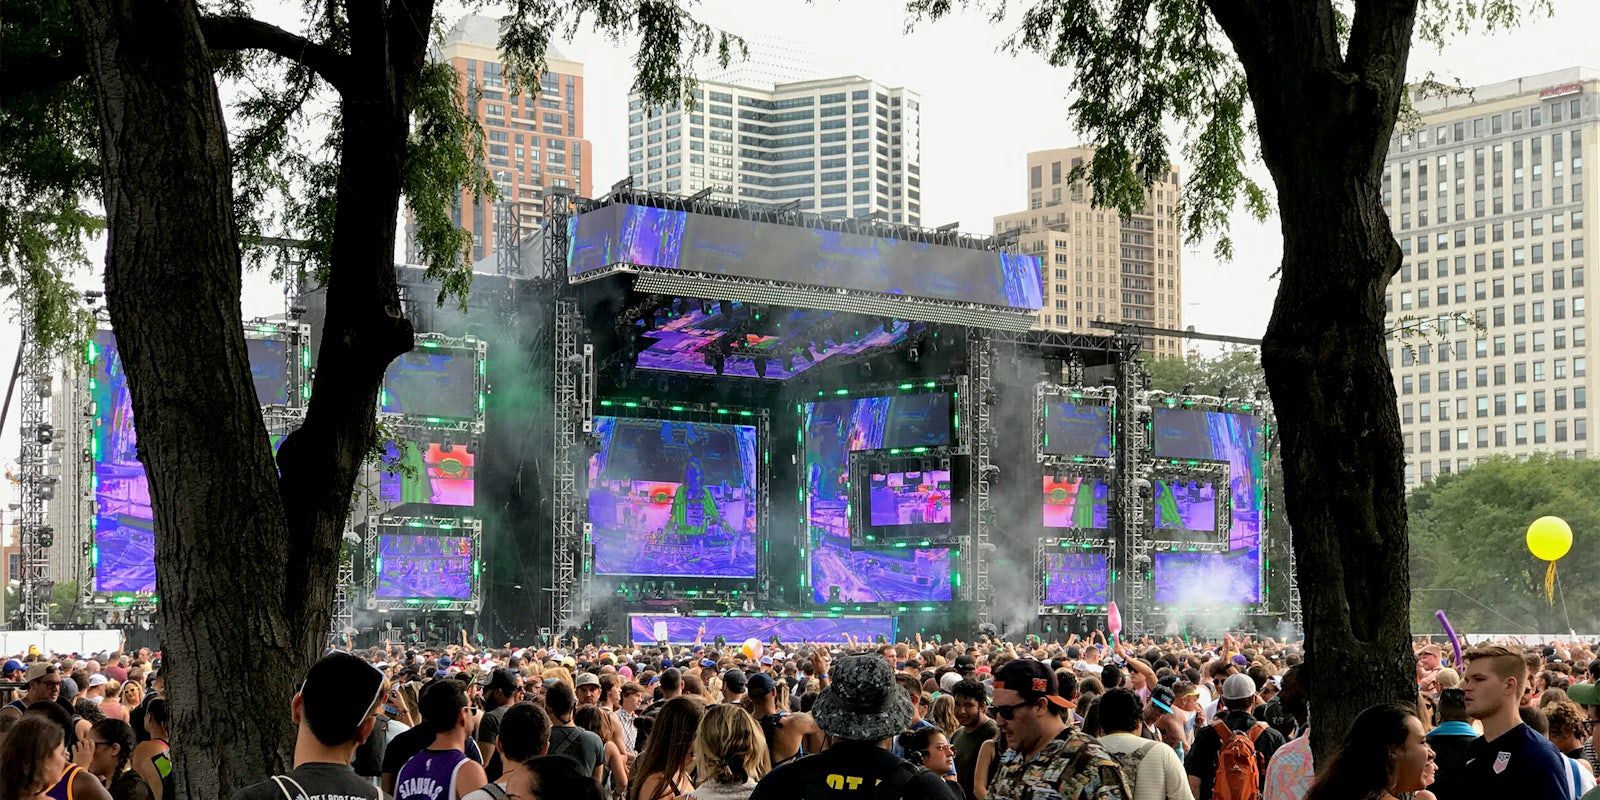 Crowd in front of stage at Lollapalooza in Chicago, 2017